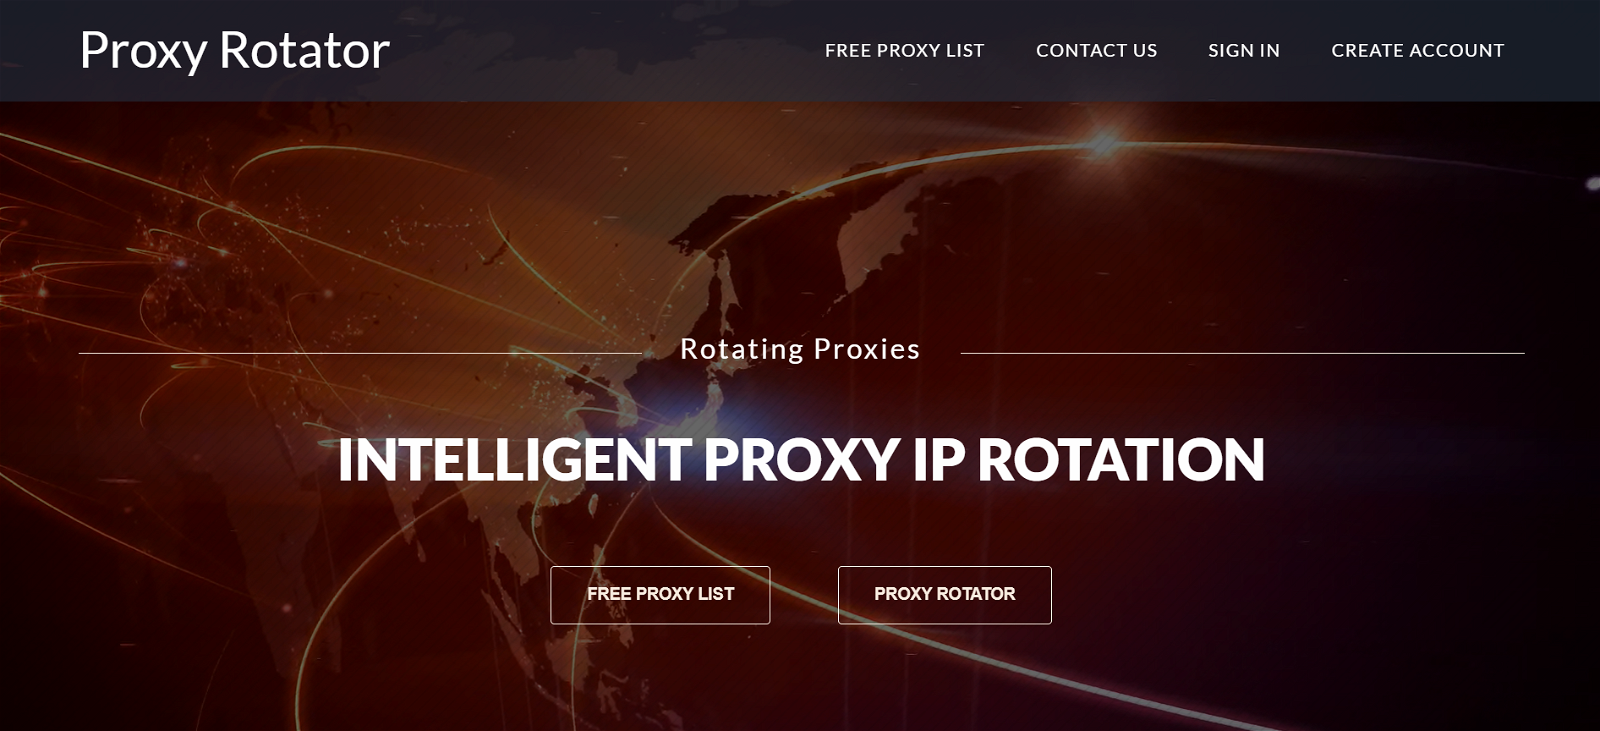 Proxy Rotator sneaker proxy residential proxies datacenter